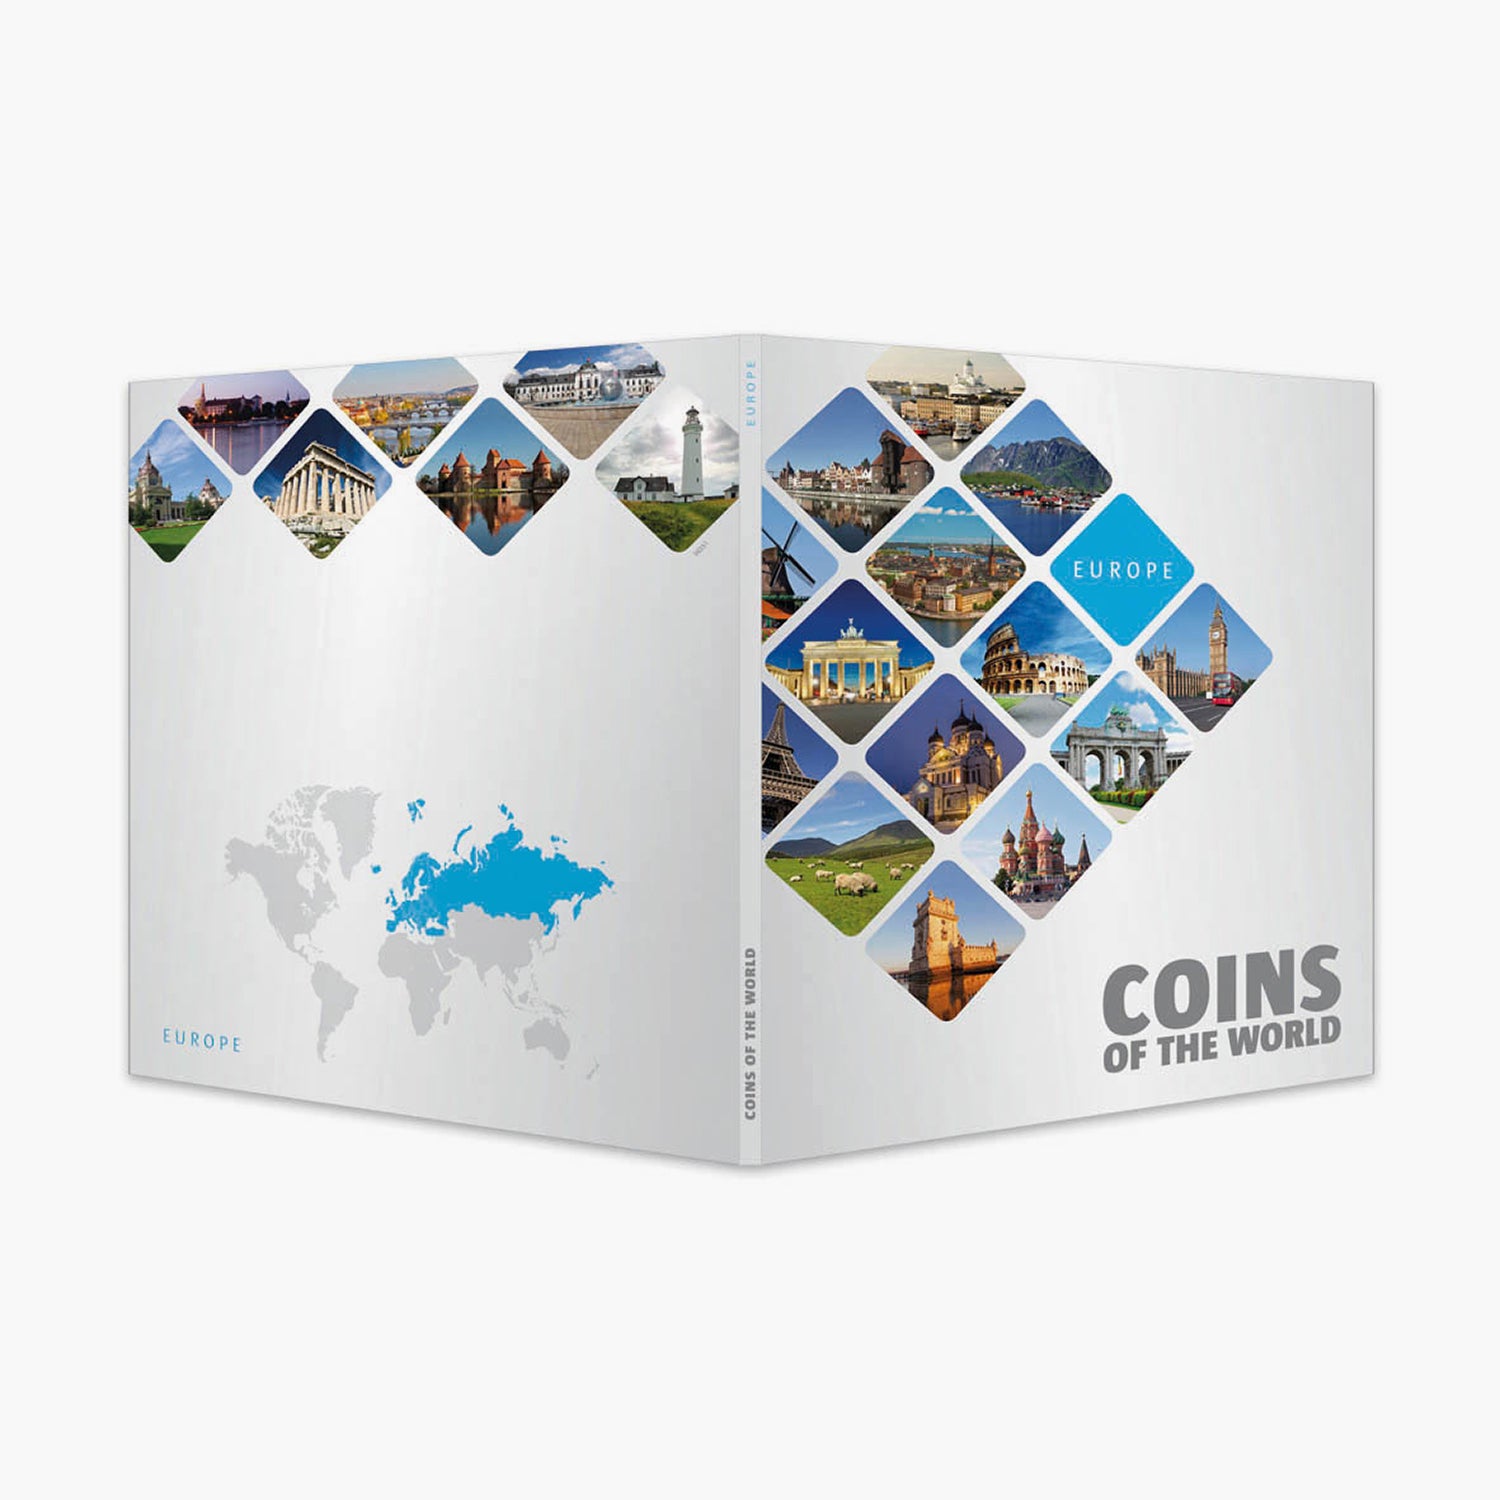 Coins of the World | Europe